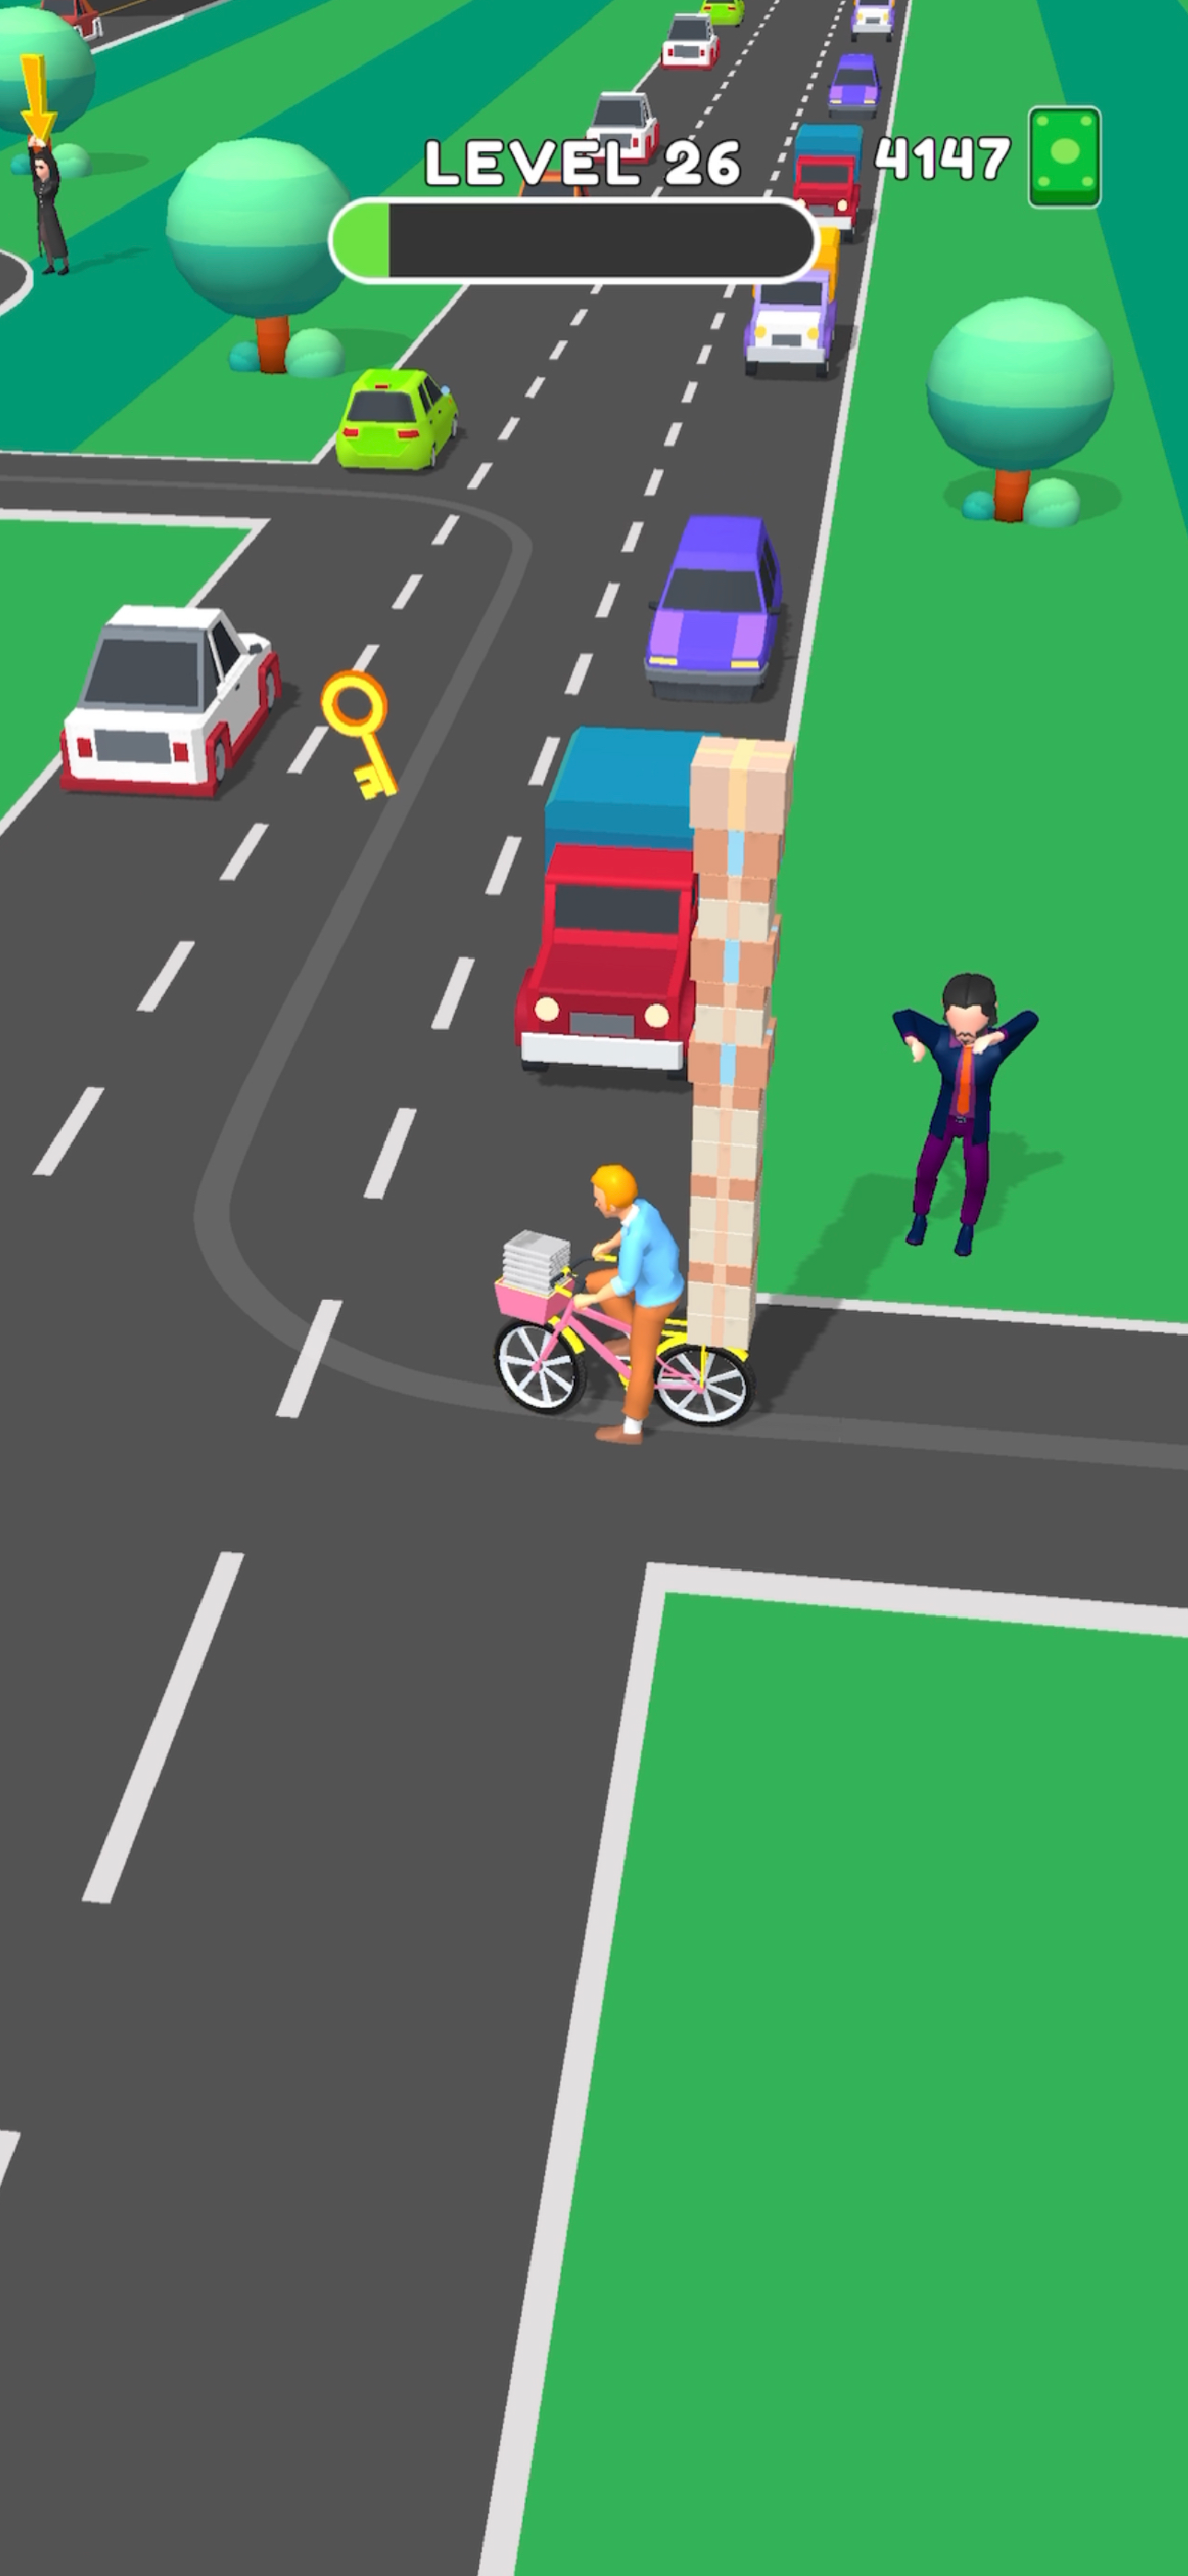 Screenshot 1 of 送紙男孩 (Paper Delivery Boy) 1.22.0